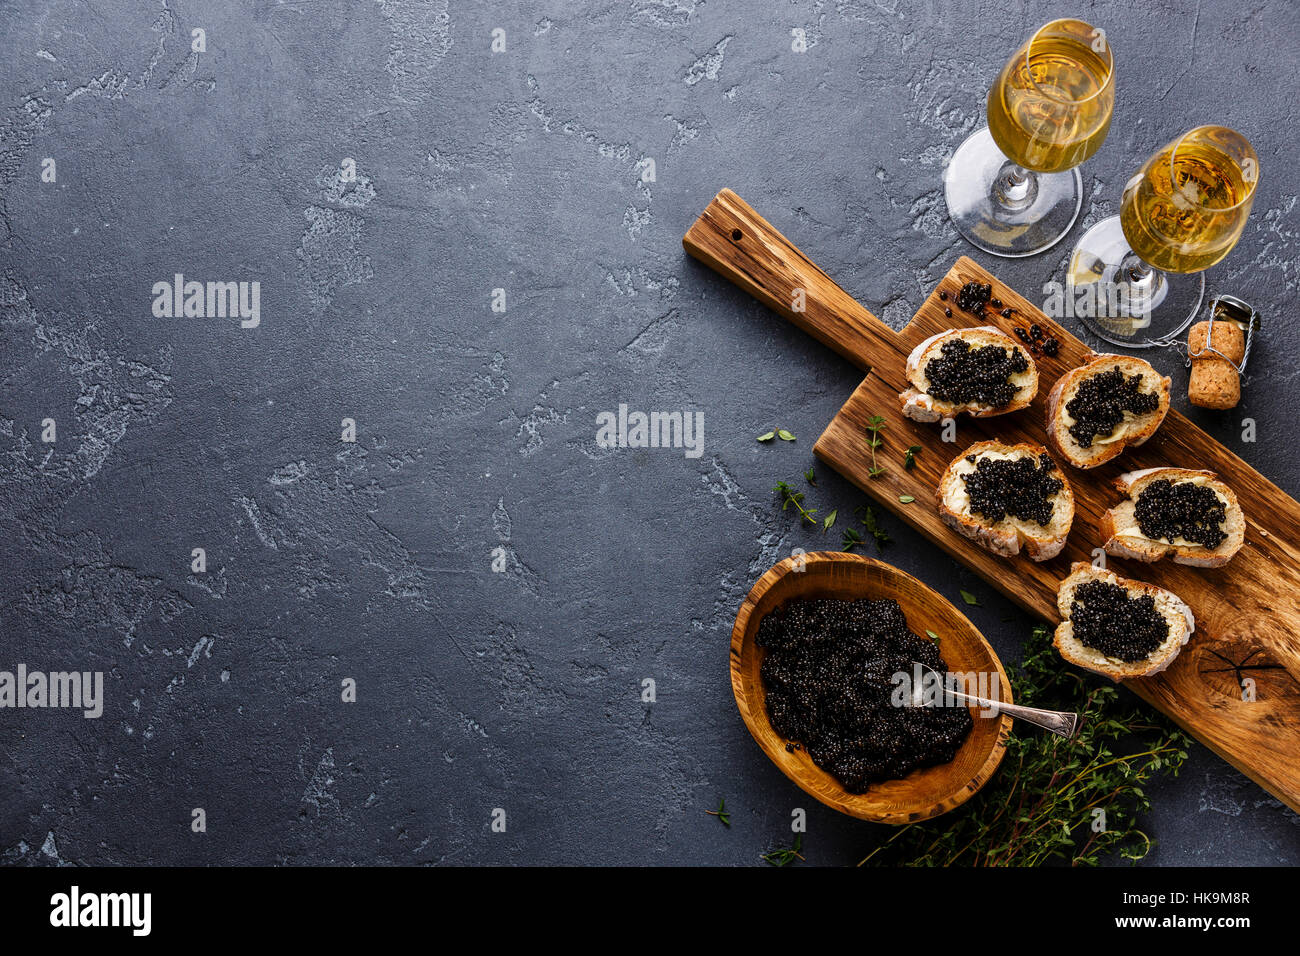 Sturgeon black caviar in wooden bowl, sandwiches and champagne on dark stone background copy space Stock Photo